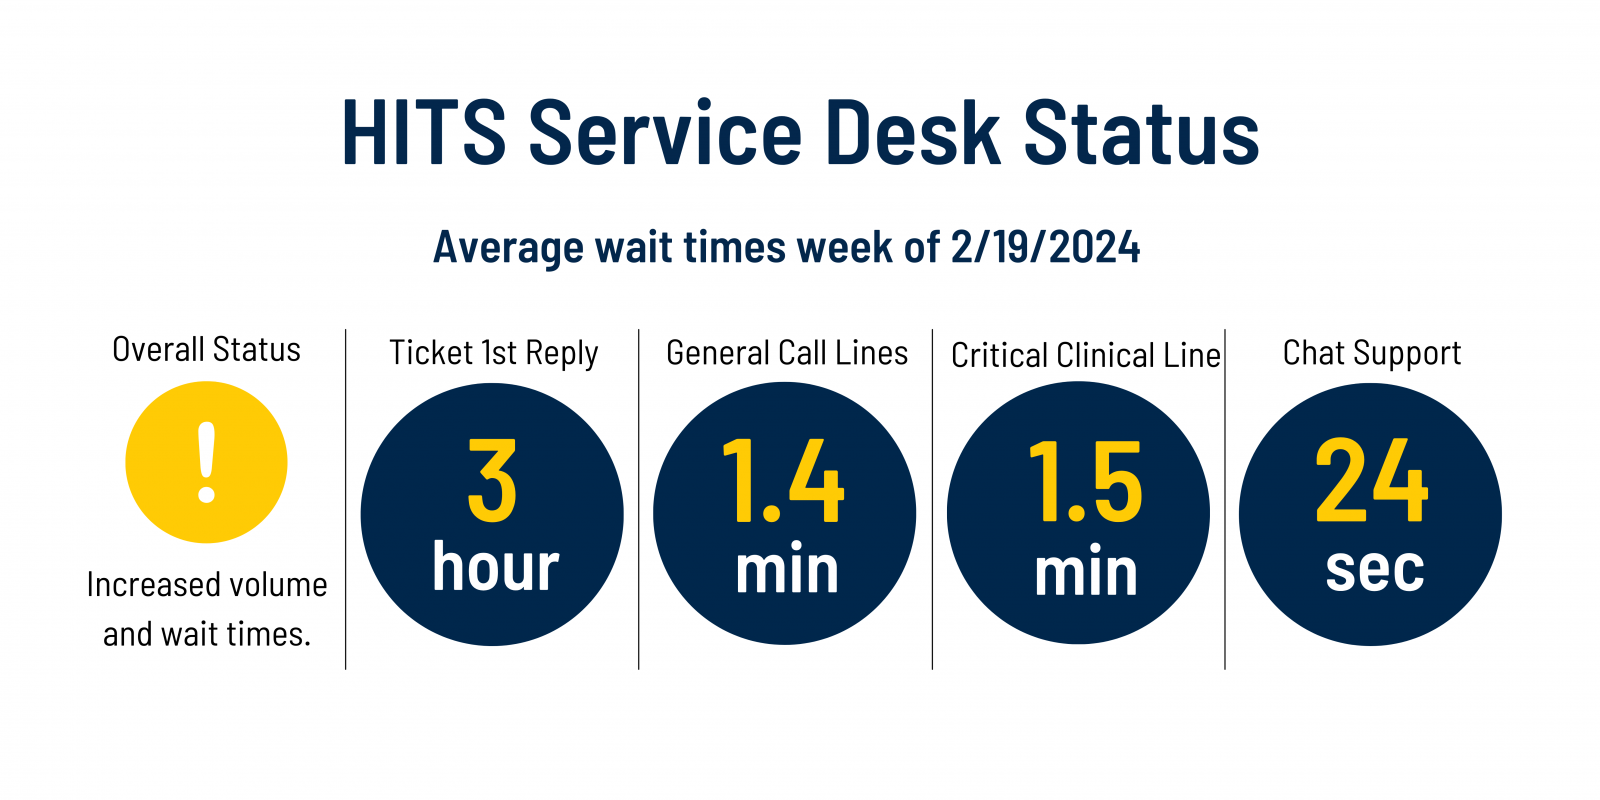 Service Desk current status is green. Normal volume and wait times.